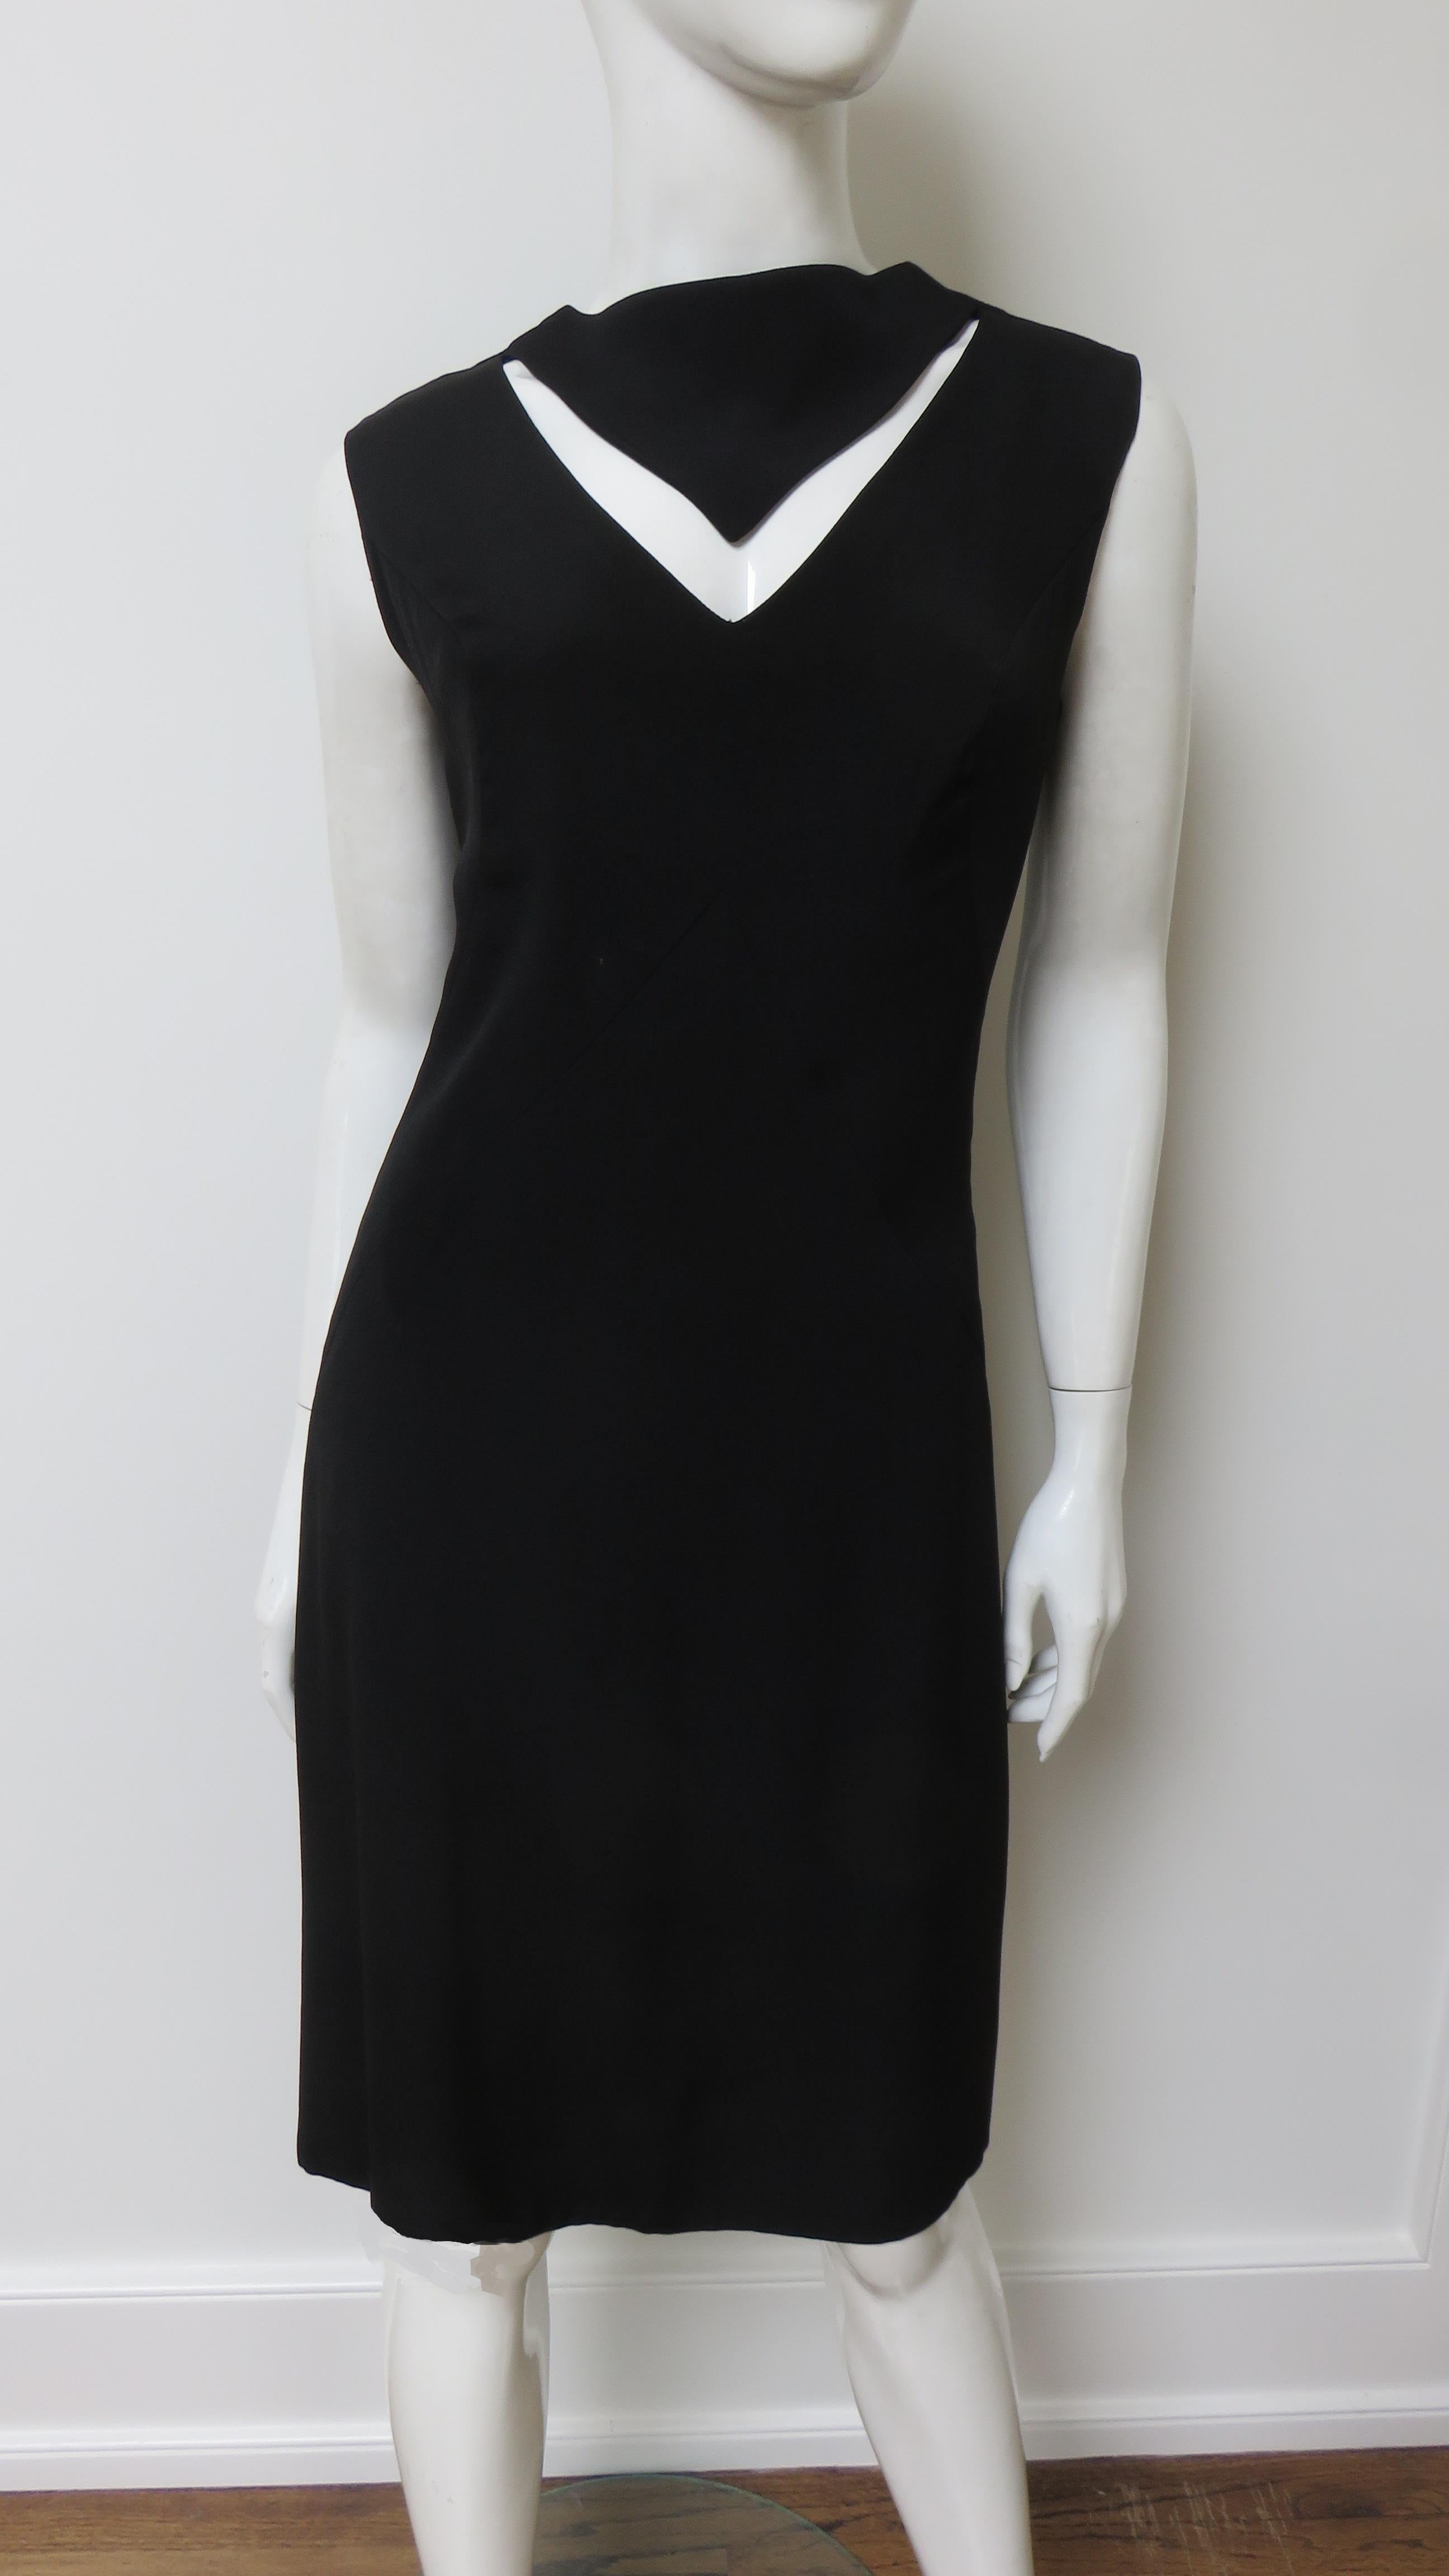 A fabulous little black dress from Louis Estevez.  It is a simple sleeveless A line dress with V cut out at the front neckline and some clever seaming enhancing the bust and waist. It is fully lined, and has a center back zipper.
Fits sizes Small